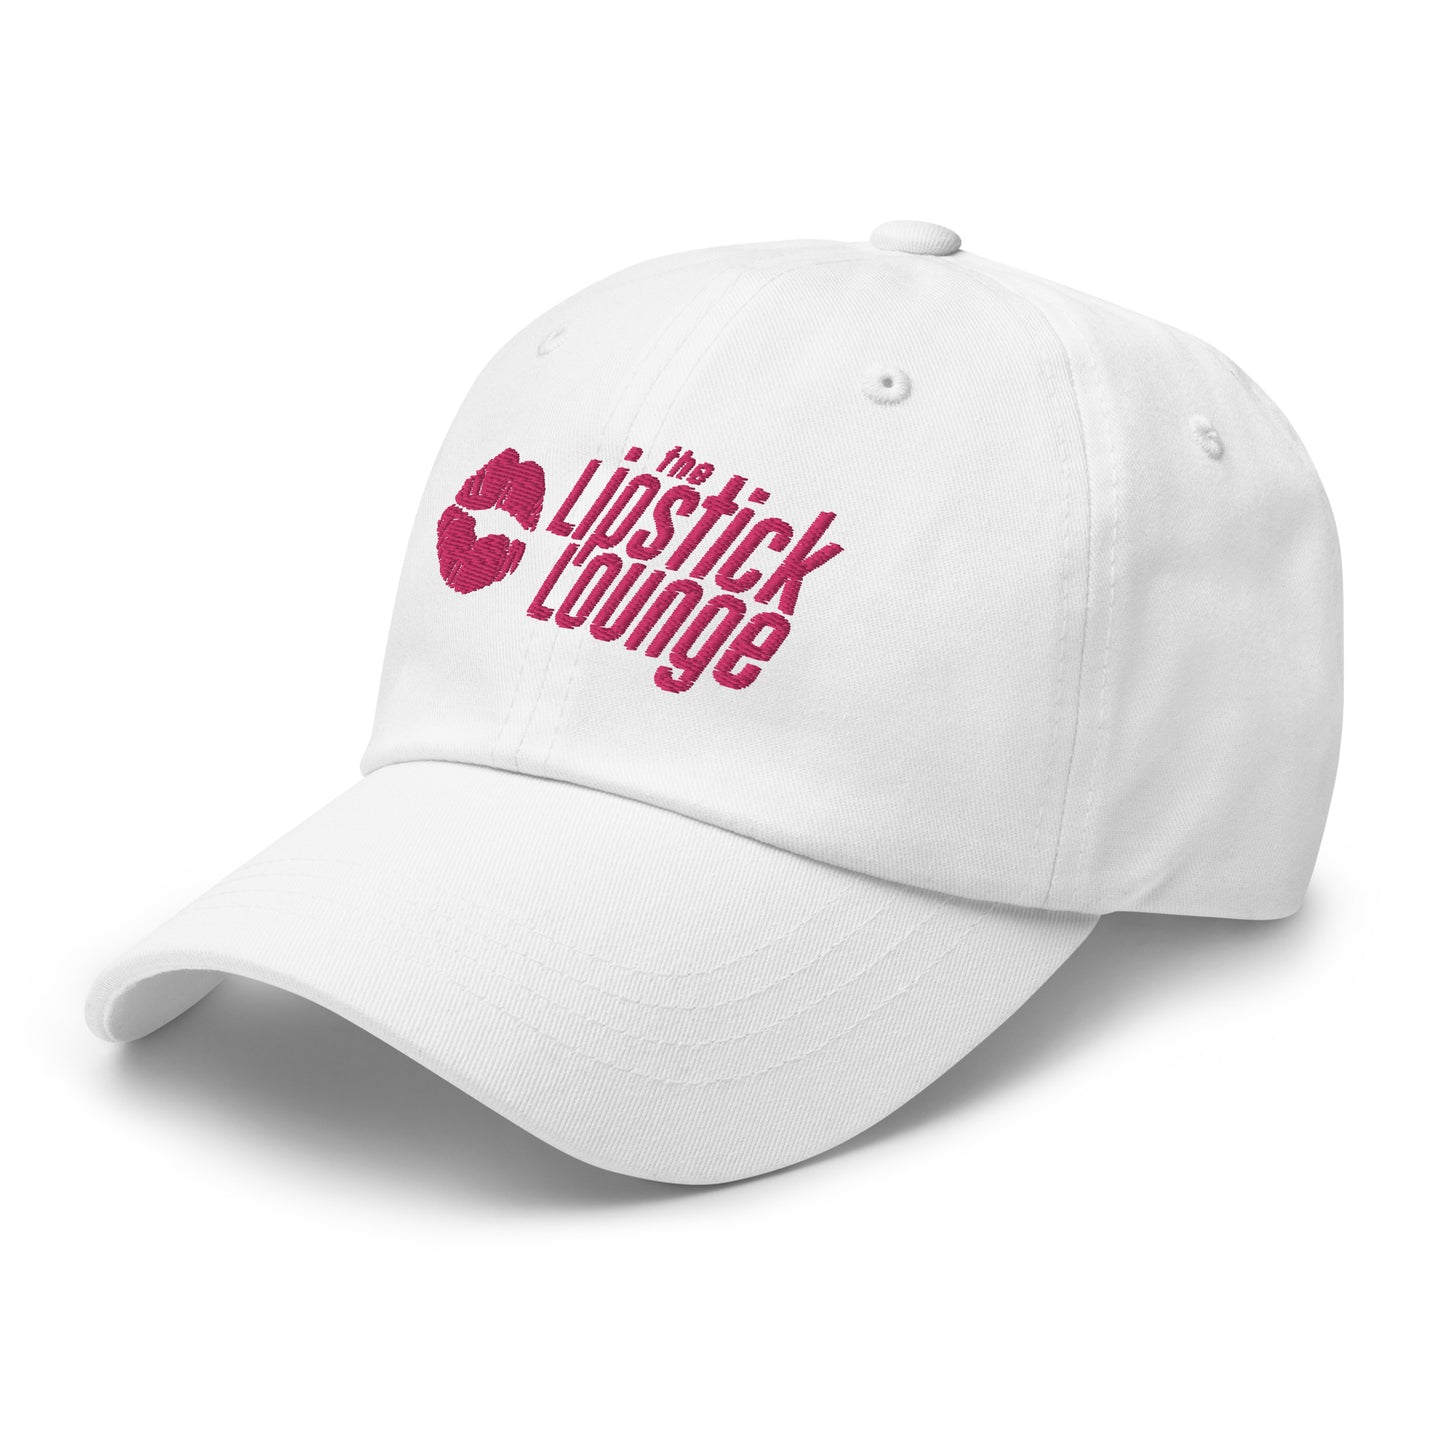 Lipstick Lounge Pink Logo Embroidered Hat